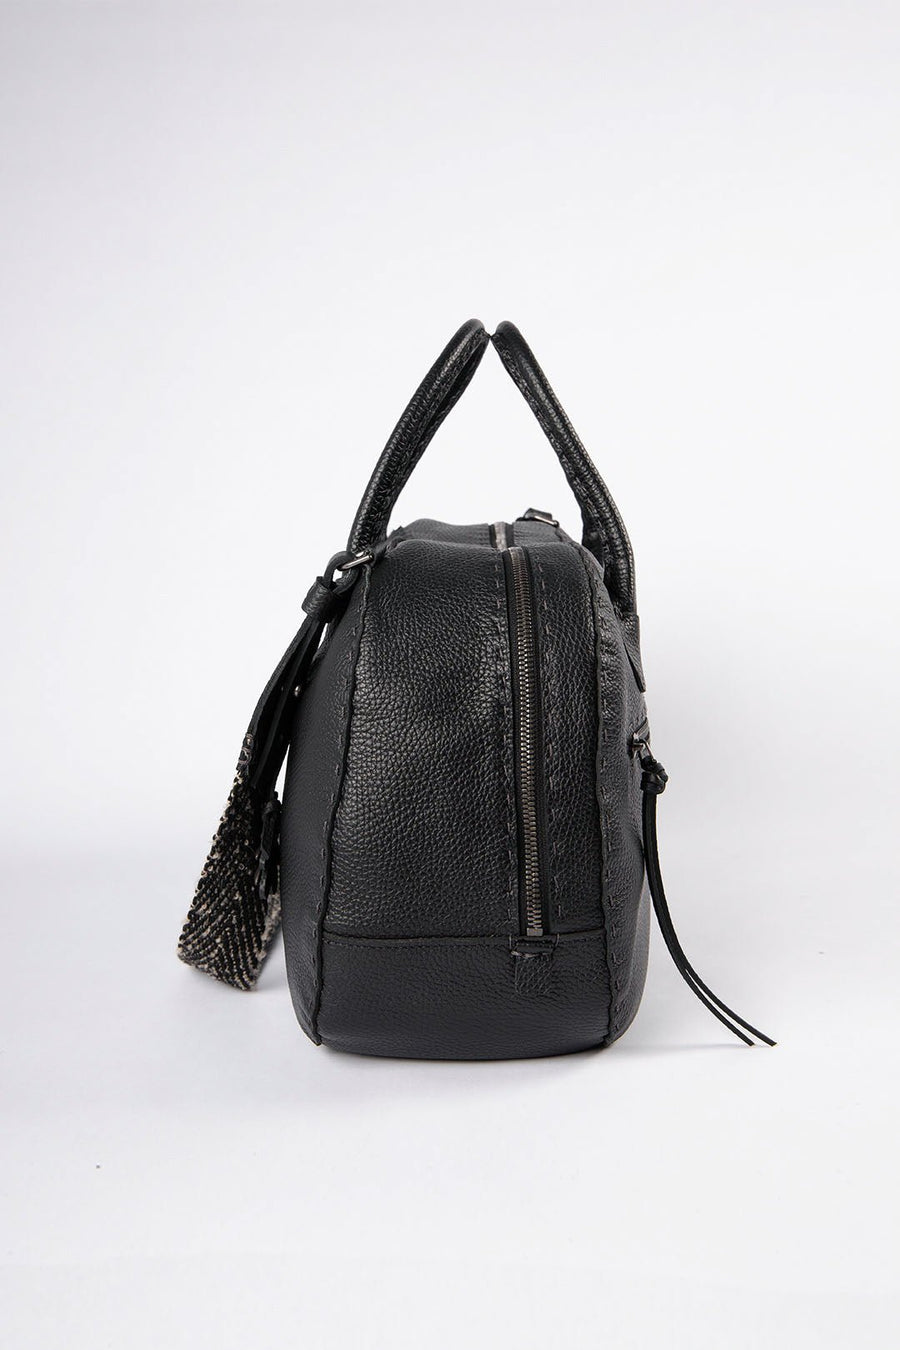 HENRY BEGUELIN LARGE CROSS BODY, BLACK - Burning Torch Online Boutique